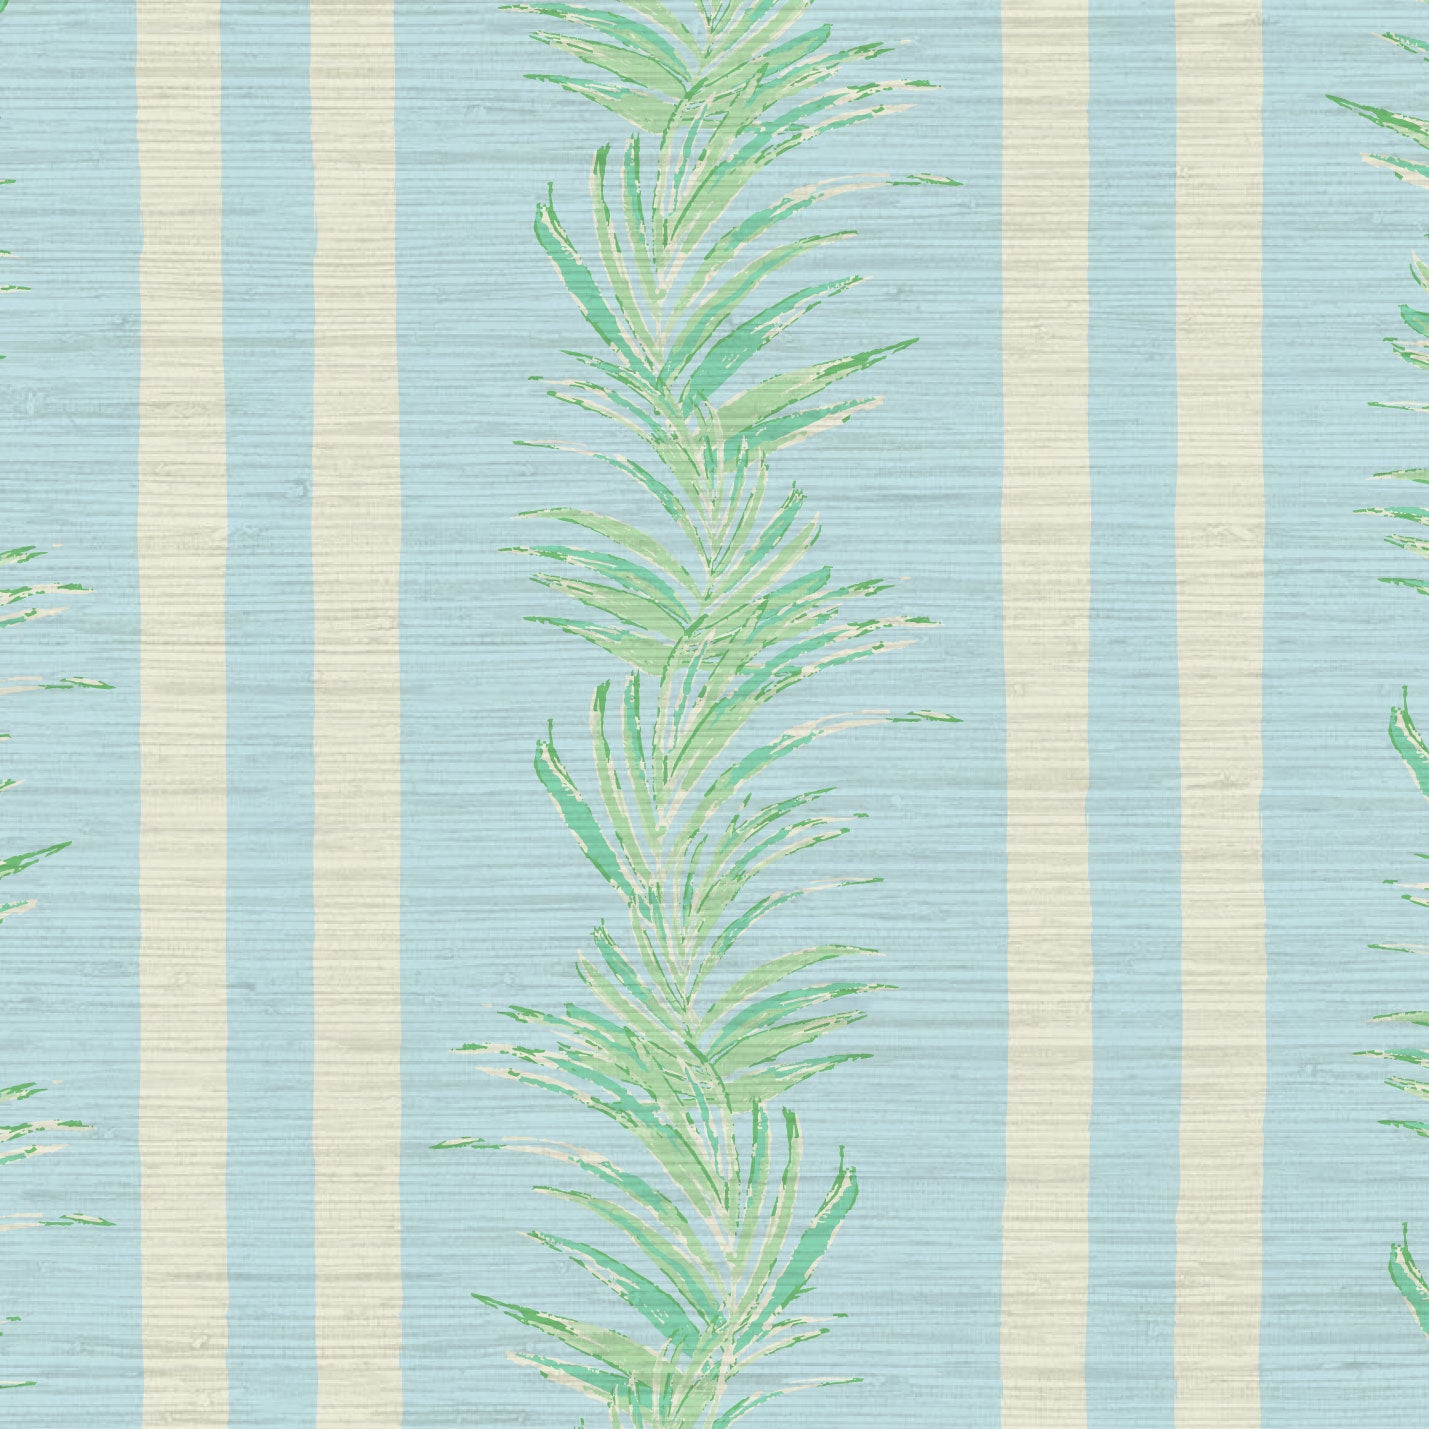 Grasscloth wallpaper Natural Textured Eco-Friendly Non-toxic High-quality  Sustainable Interior Design Bold Custom Tailor-made Retro chic Grand millennial Maximalism  Traditional Dopamine decor Tropical Jungle Coastal Garden Seaside Seashore Waterfront Vacation home styling Retreat Relaxed beach vibes Beach cottage Shoreline Oceanfront Nautical Cabana preppy Cottage core Countryside Vintage vertical stripe cabana leaf palm green french blue white